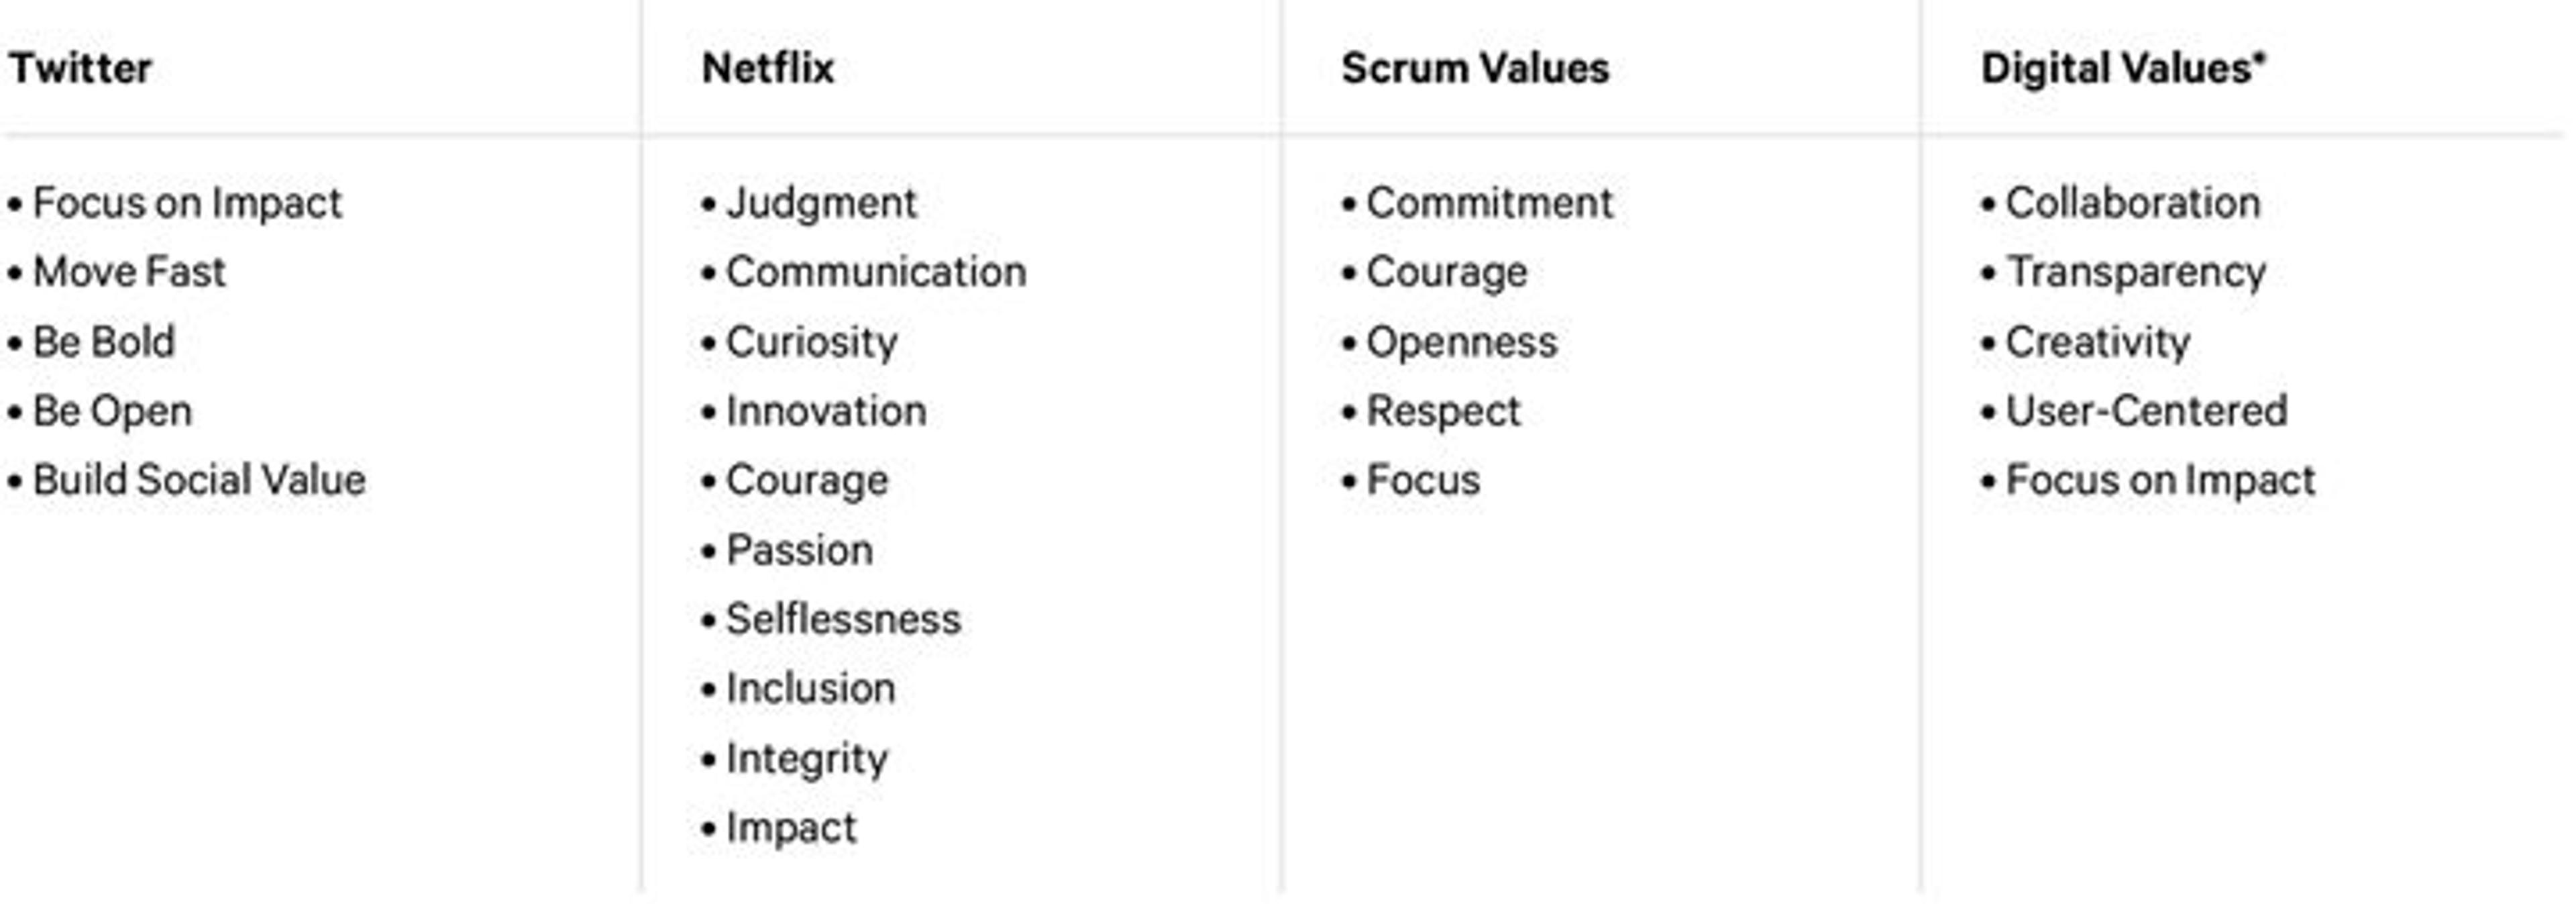 Table 3. Cultural values of Twitter, Netflix, and the Scrum process, alongside the results of a 'digital values' poll of 18 current and former heads of digital department in large cultural institutions in the United States, who noted the cultural values they believe best foster a cohesive and effective digital department.